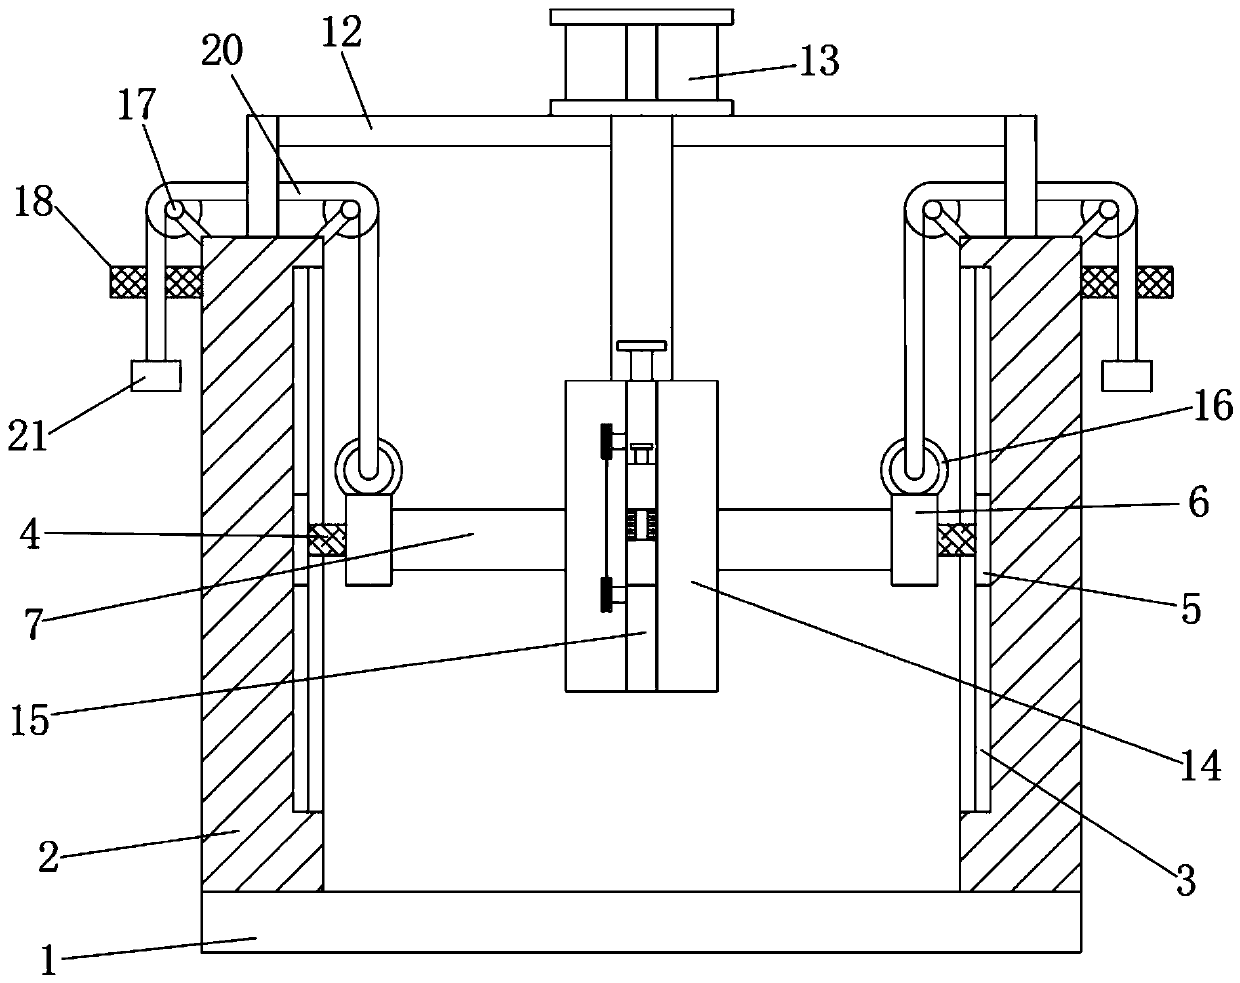 Positioning and rotating mechanism for reel in textile equipment